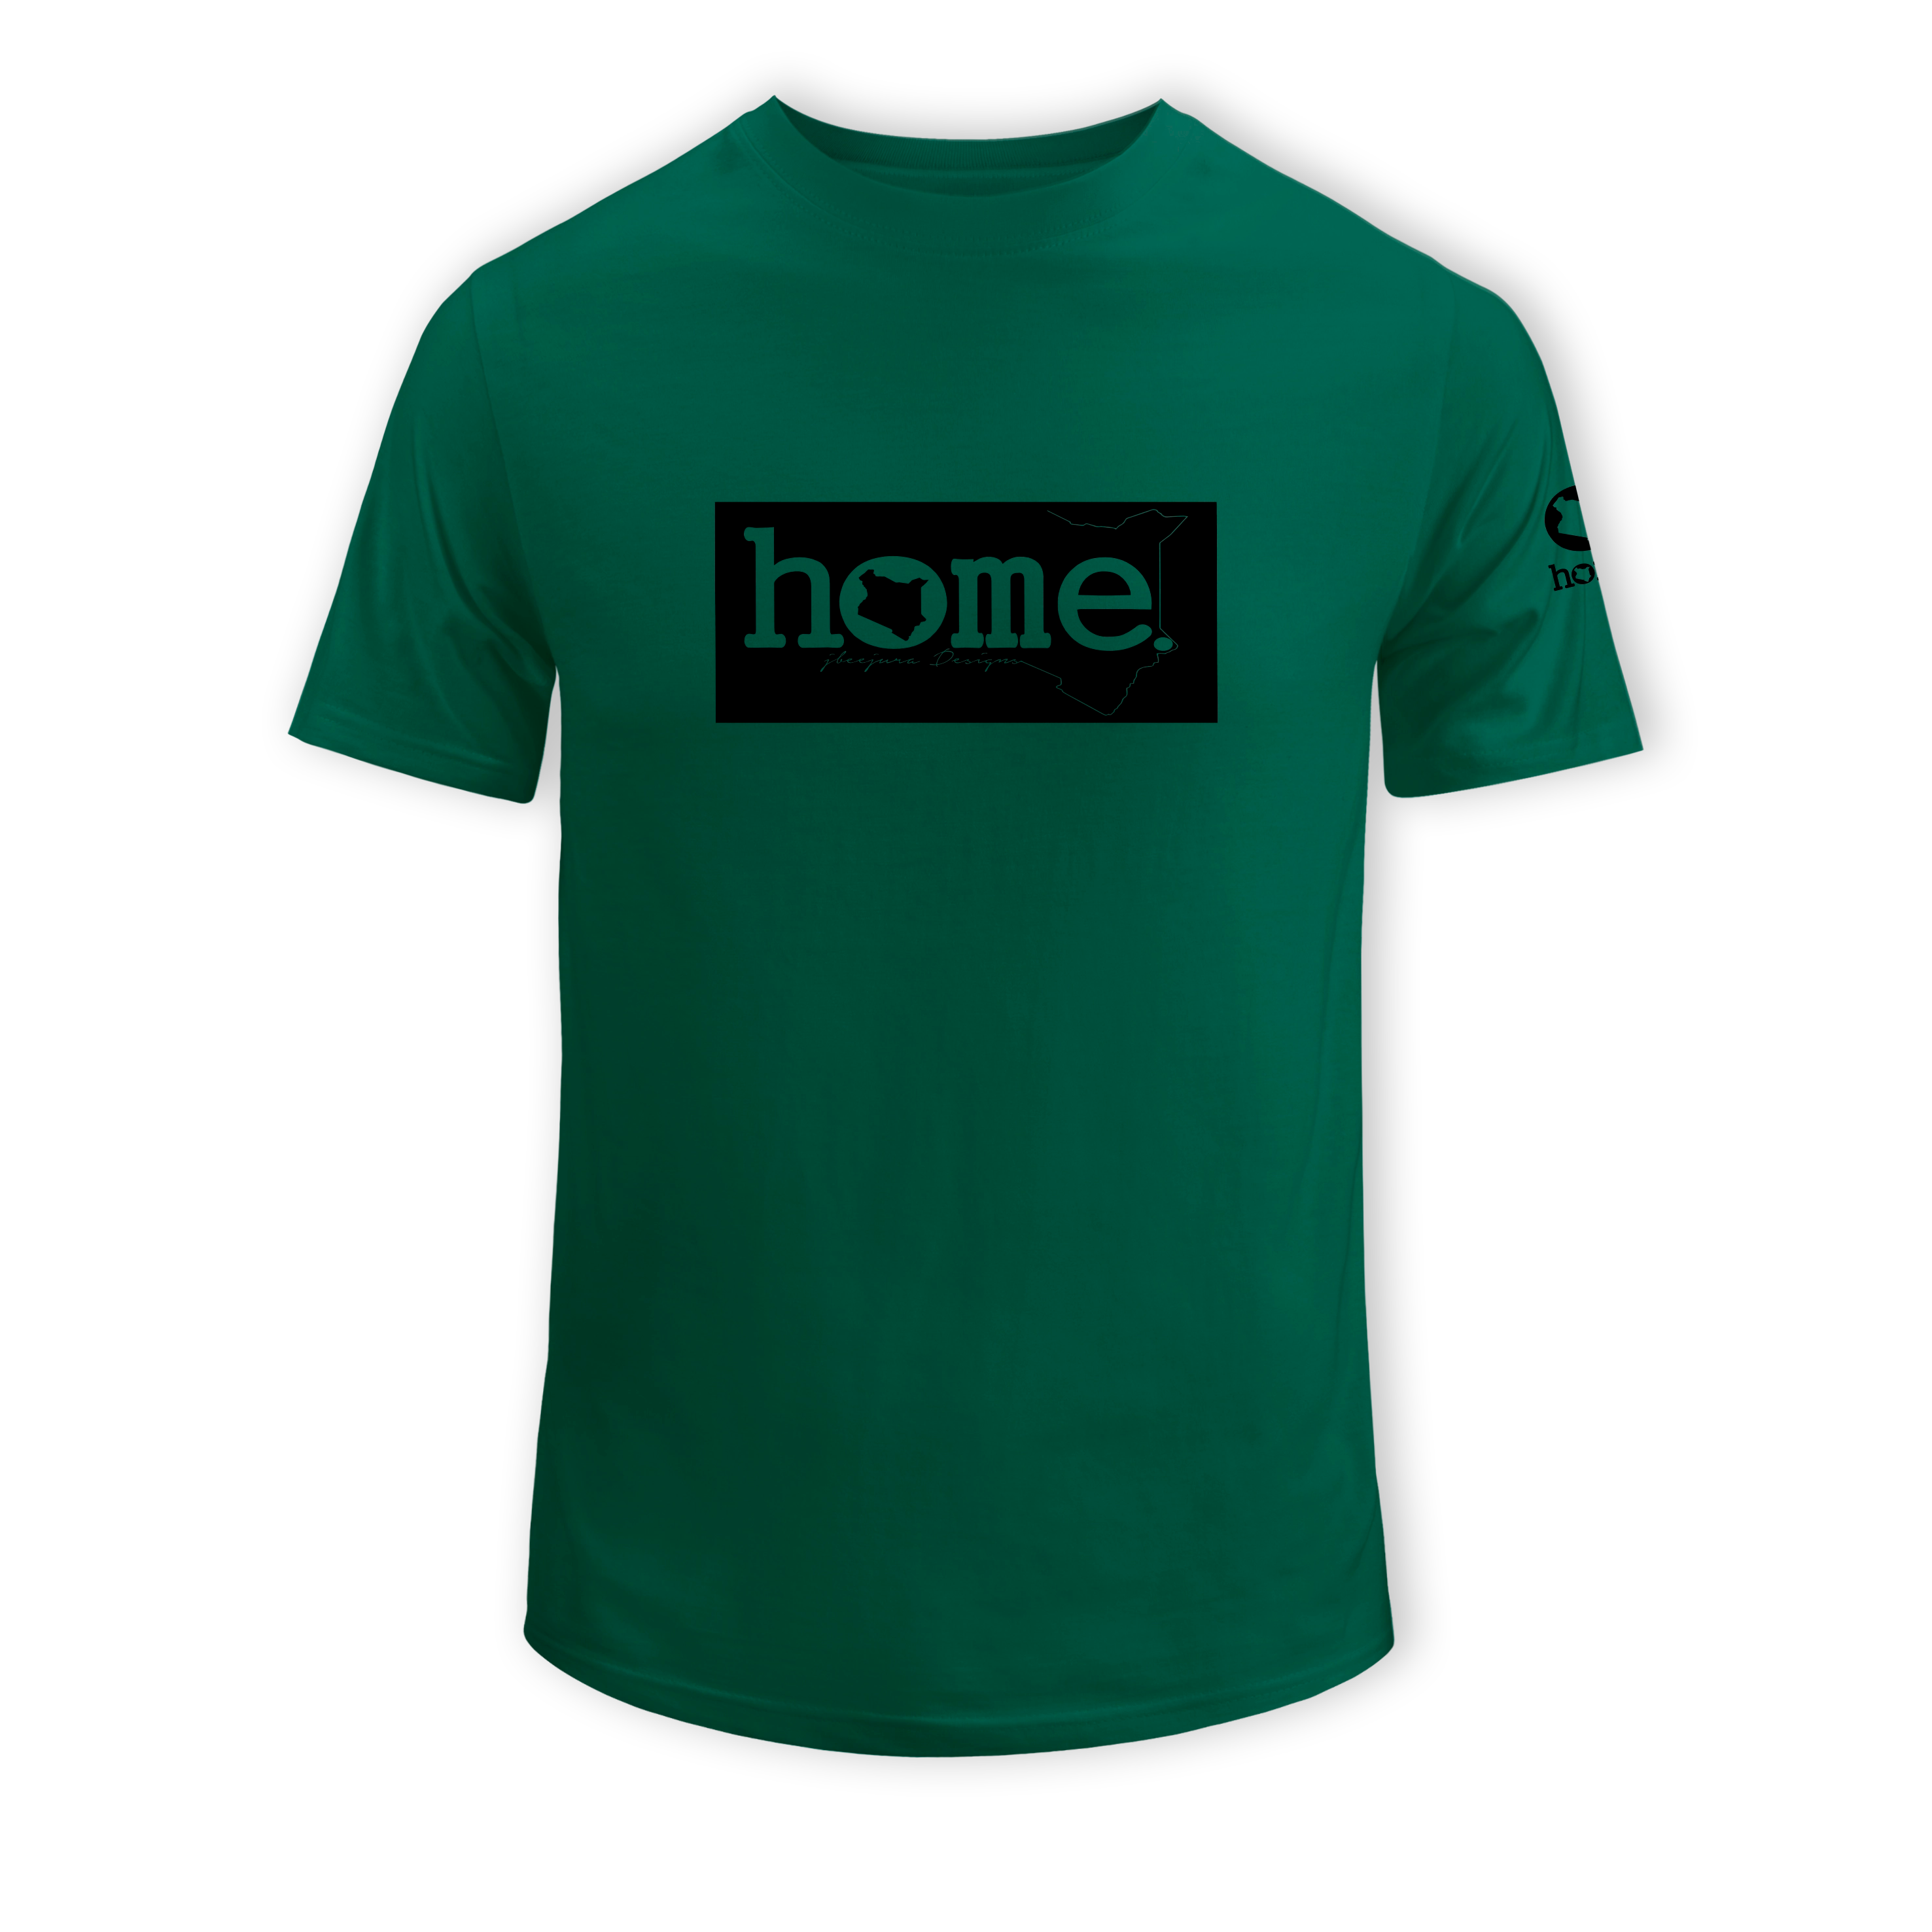 home_254 KIDS SHORT-SLEEVED RICH GREEN T-SHIRT WITH A BLACK CLASSIC PRINT – COTTON PLUS FABRIC